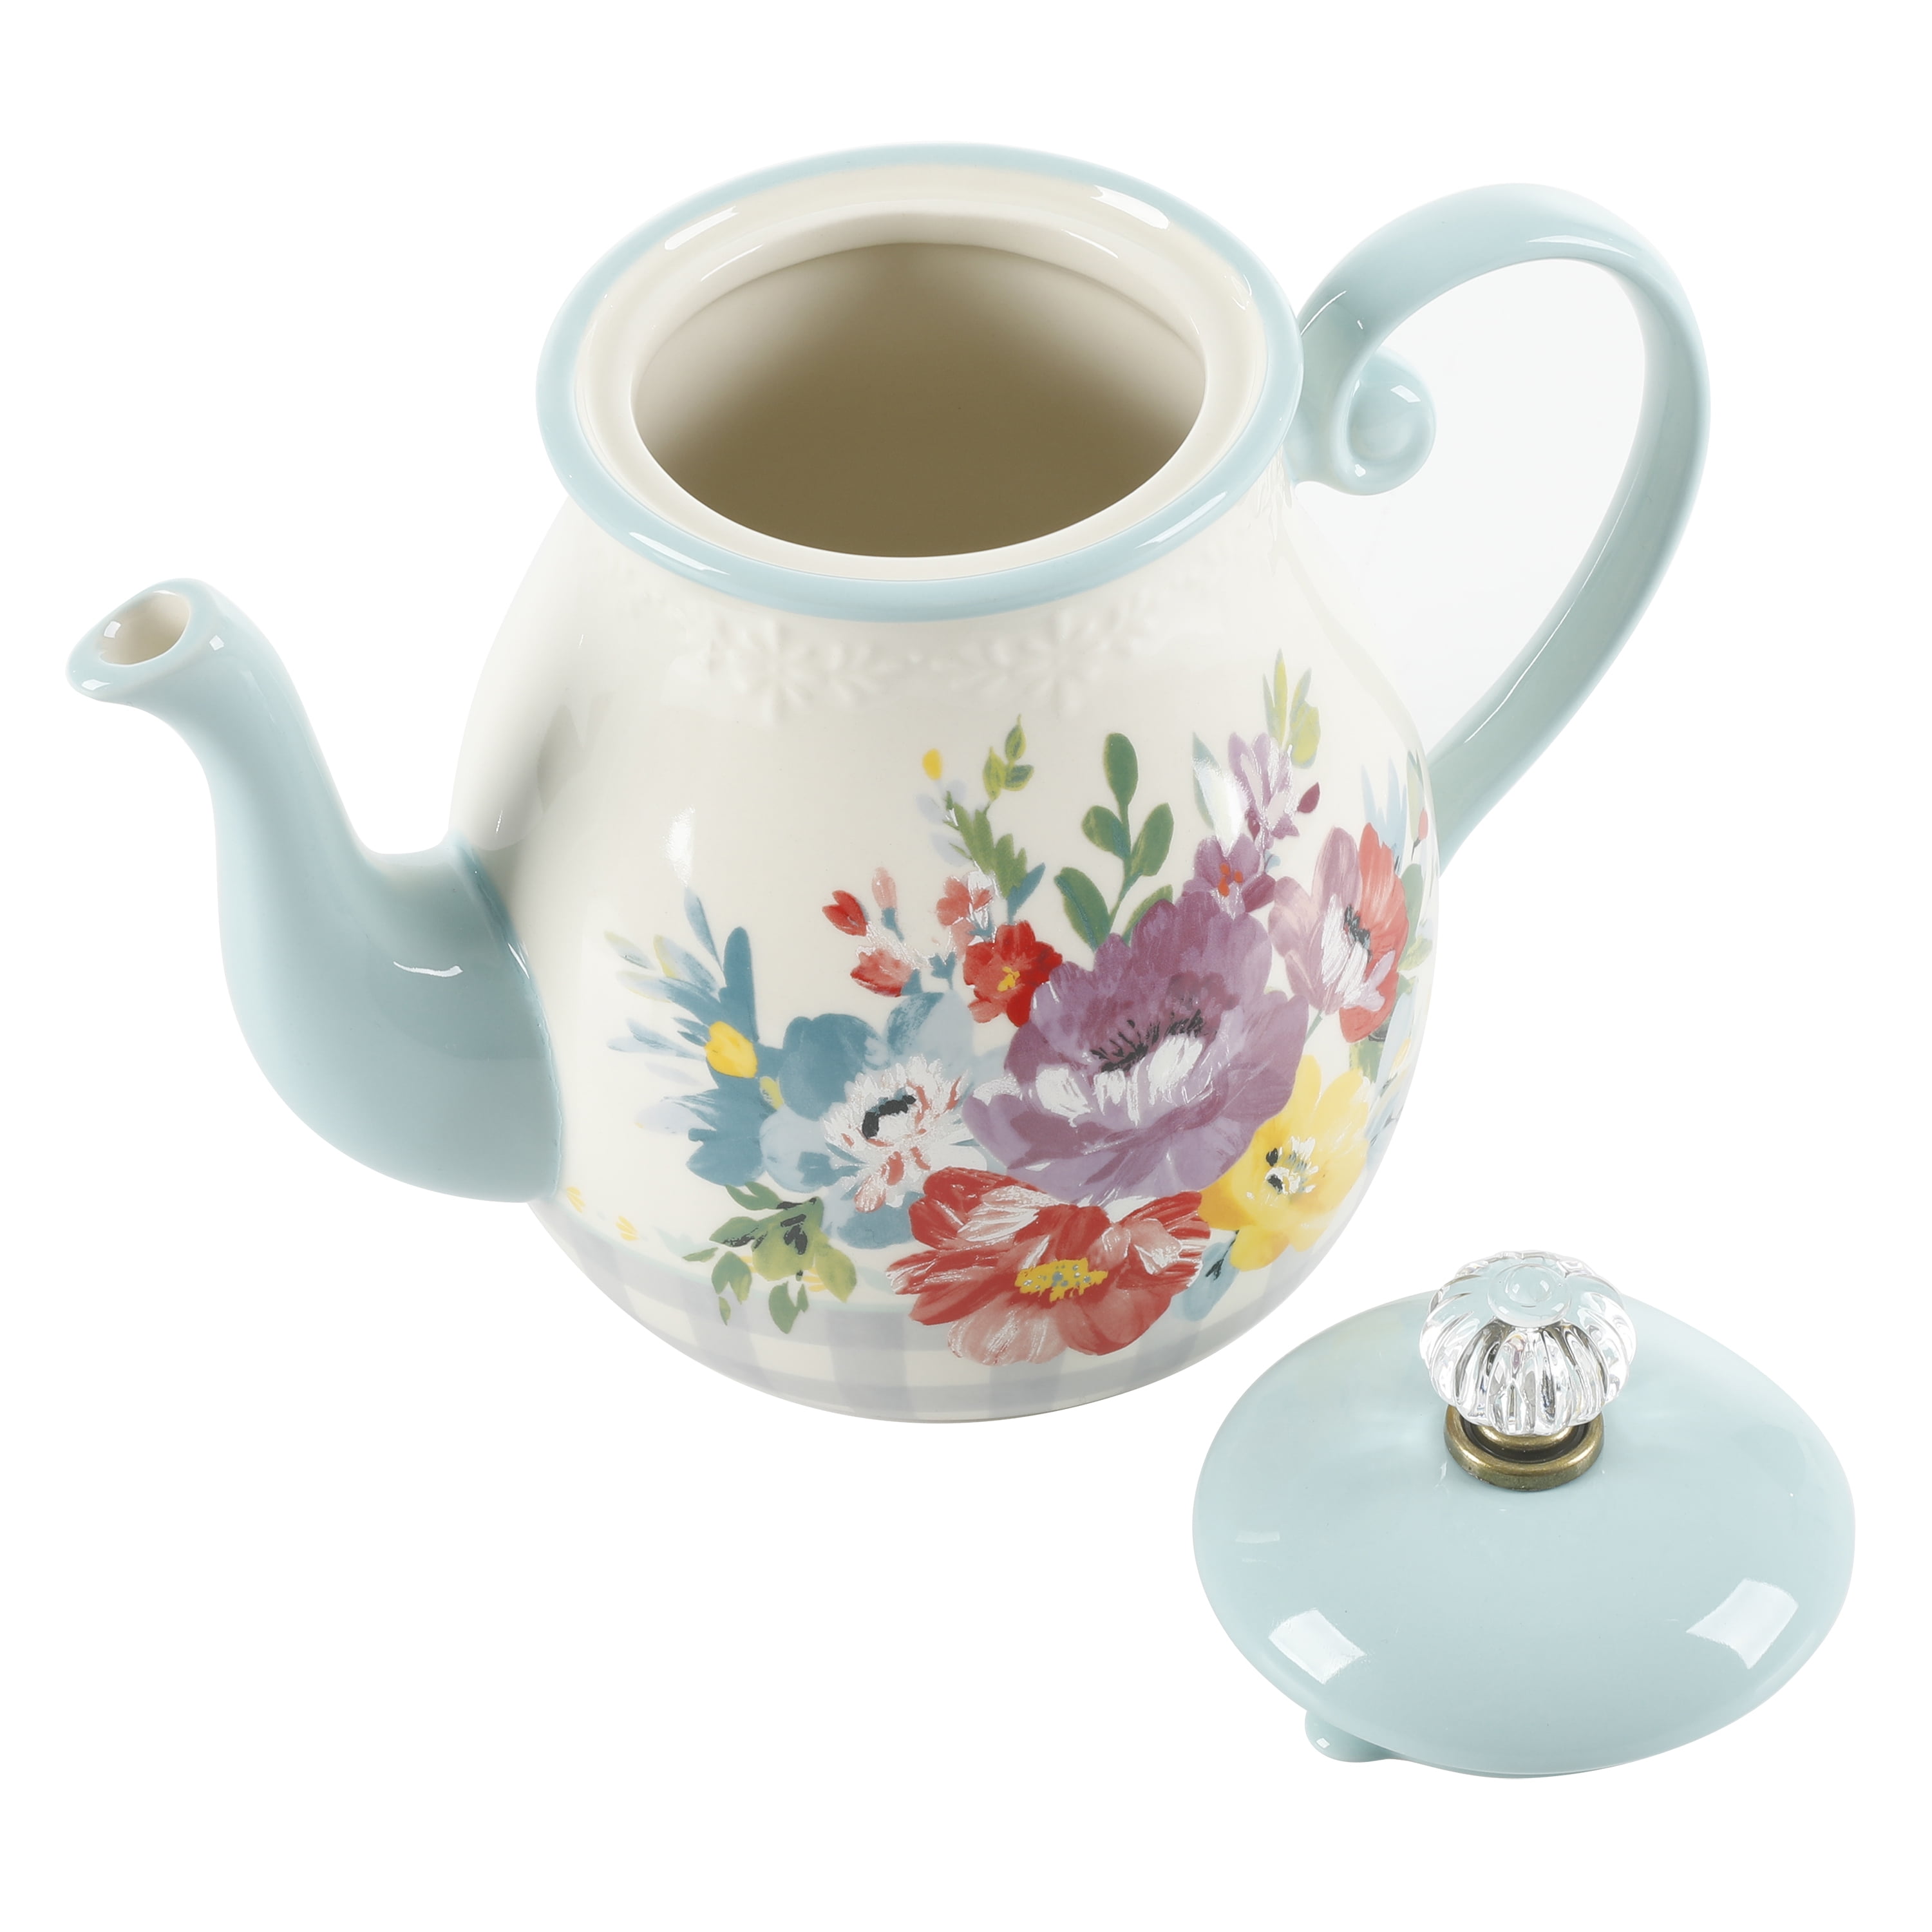 The Pioneer Woman Sweet Romance Stainless Steel Whistling Tea